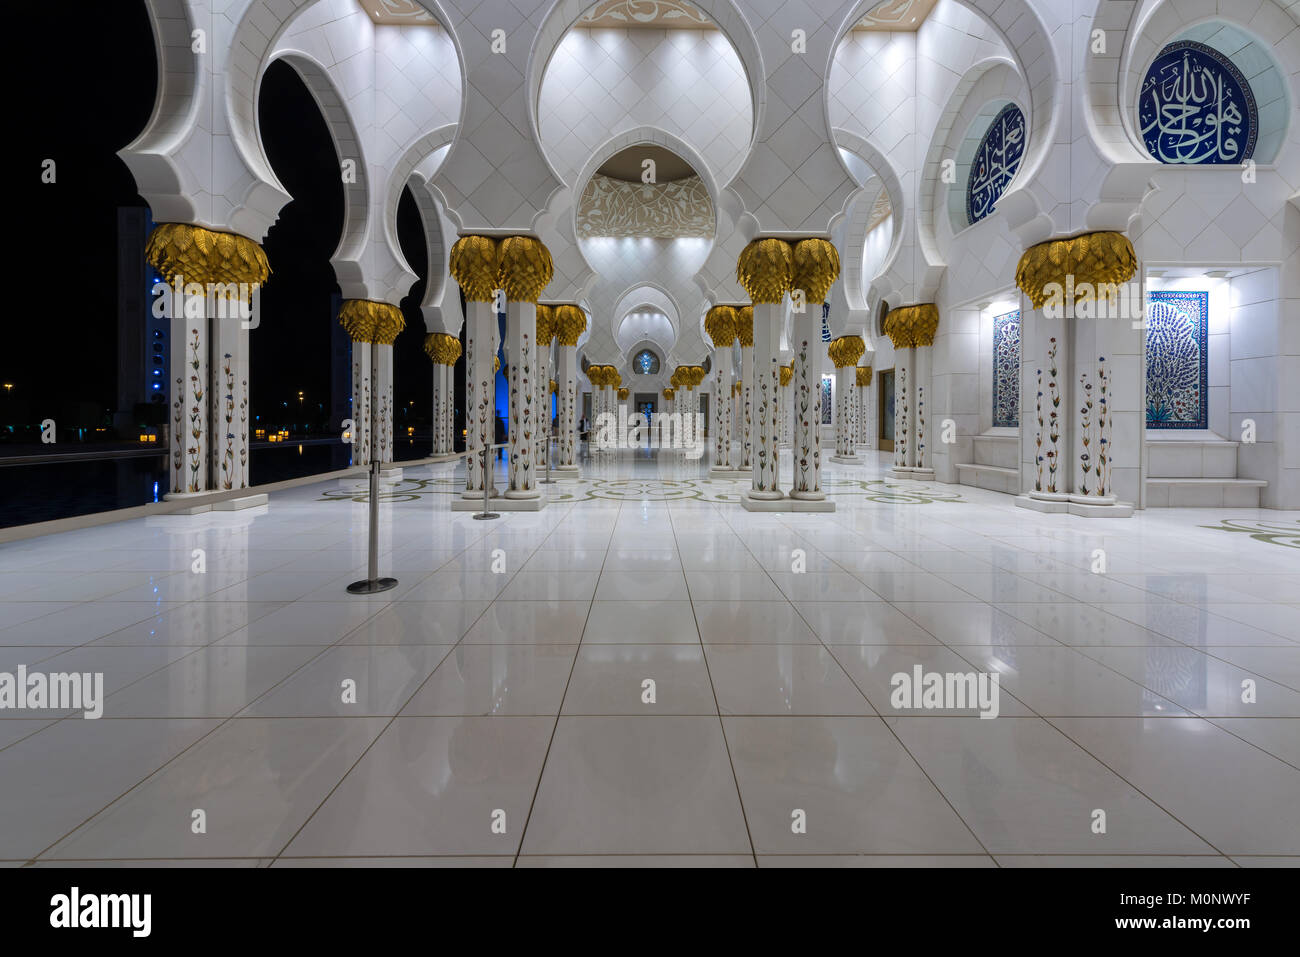 The architecture of the Sheikh Zayed Grand Mosque in Abu Dhabi, UAE Stock Photo